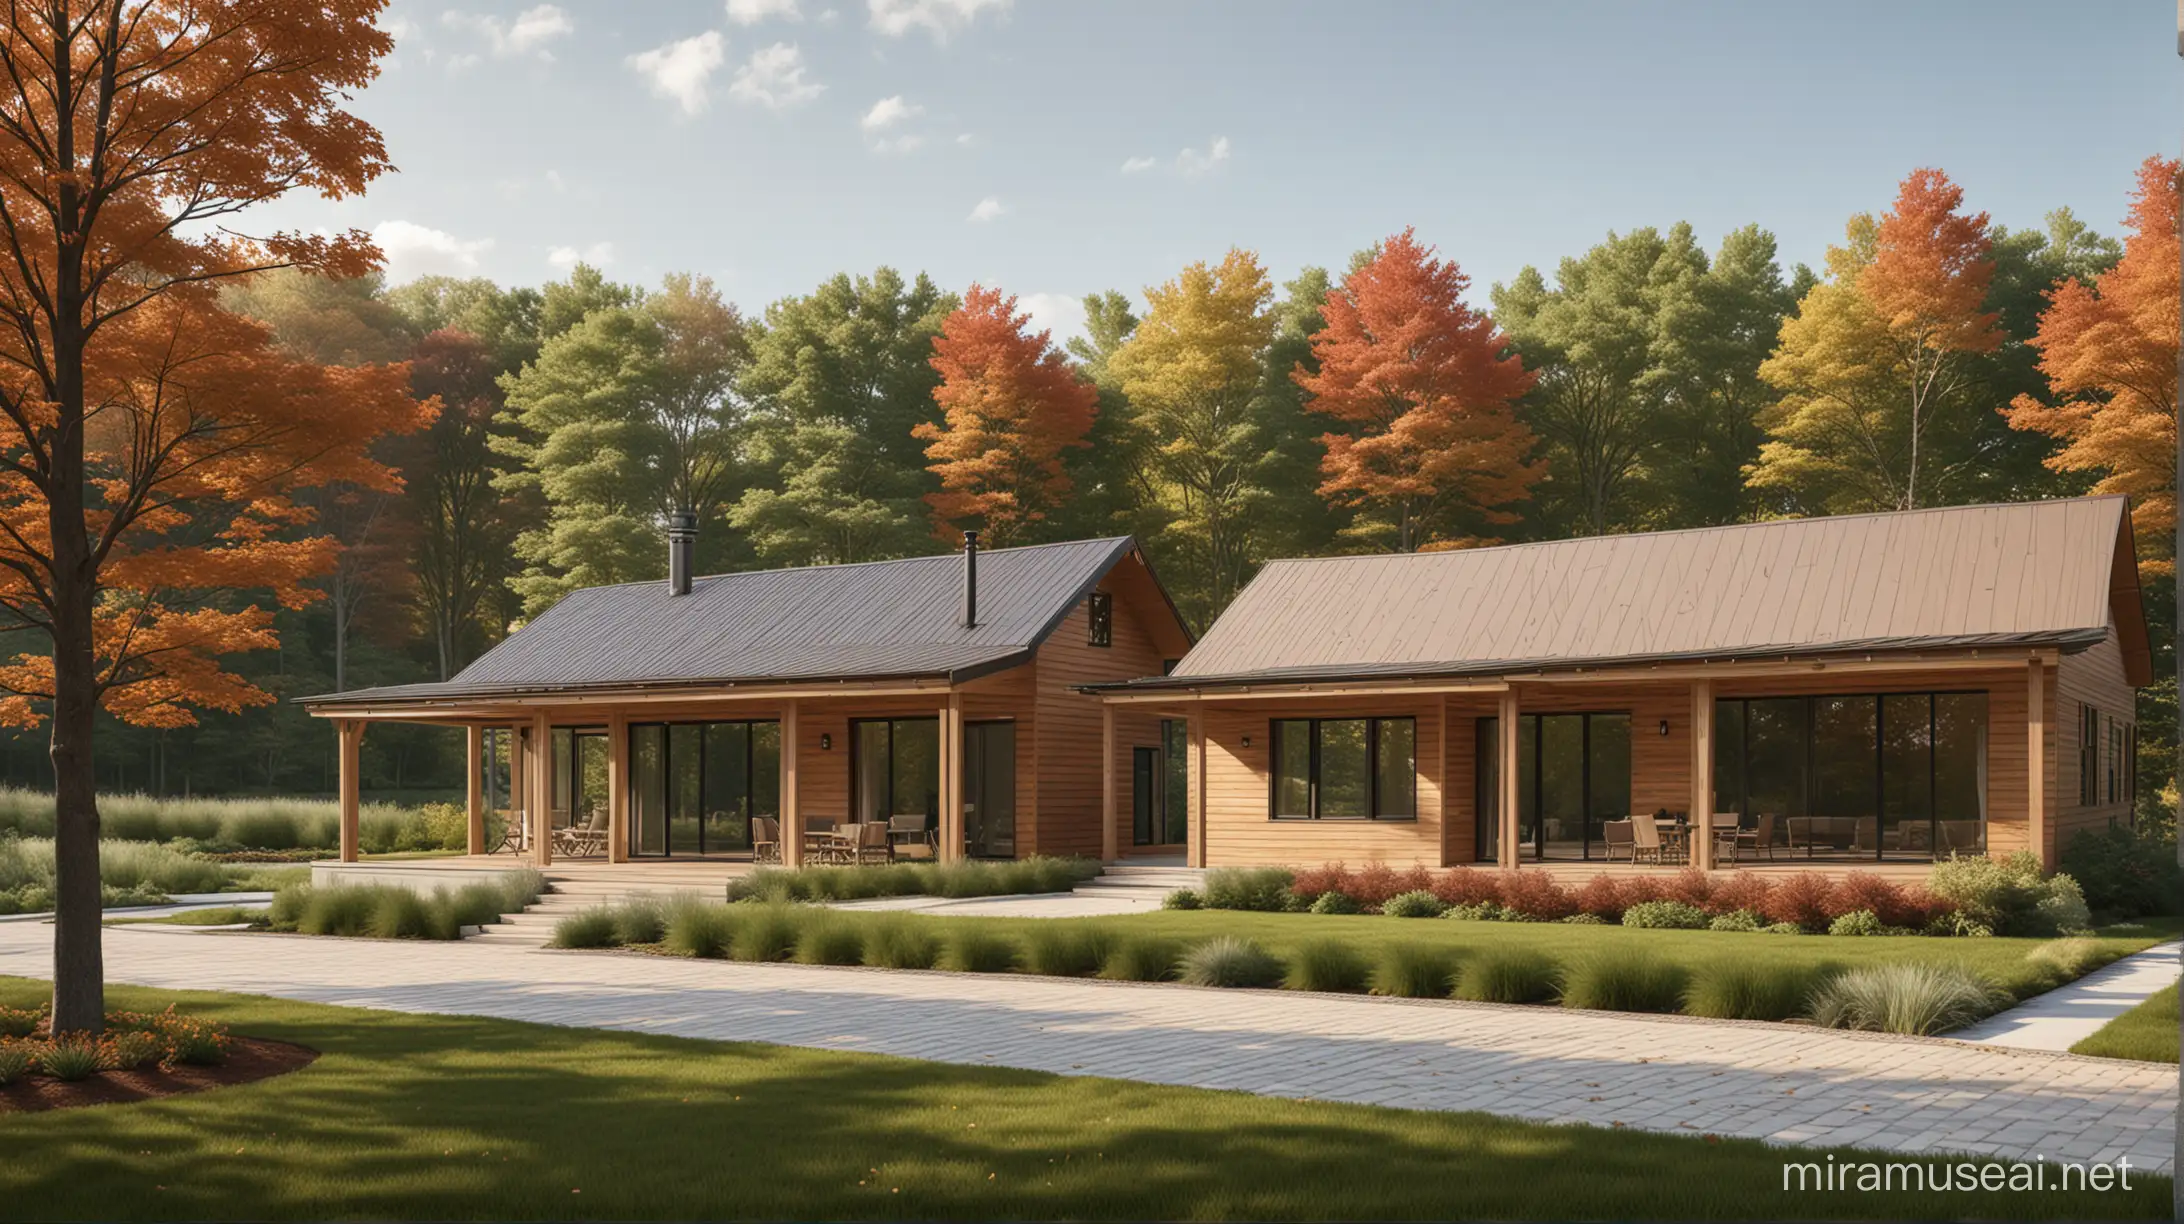 photorealistic rendering of east coast canadian cabins, modern, white oak planks and bronze standing seam roof, with a stand of deciduous trees in the background. The foreground is green grass, with leaves and a low red brick planting bed. Autumn scene.